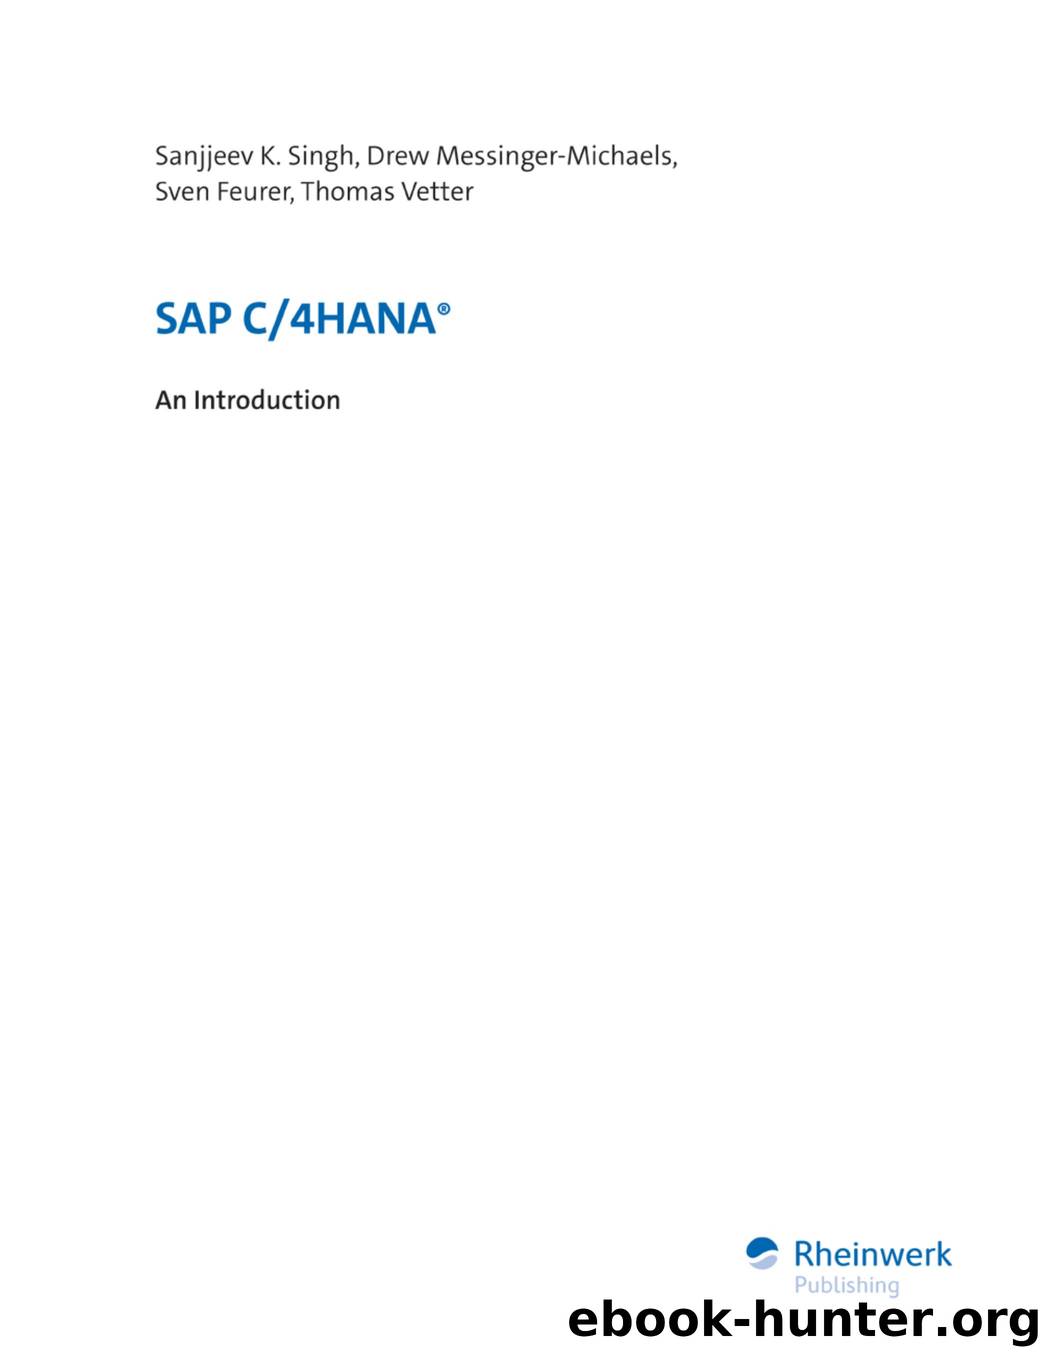 SAP C4HANA An Introduction by Unknown